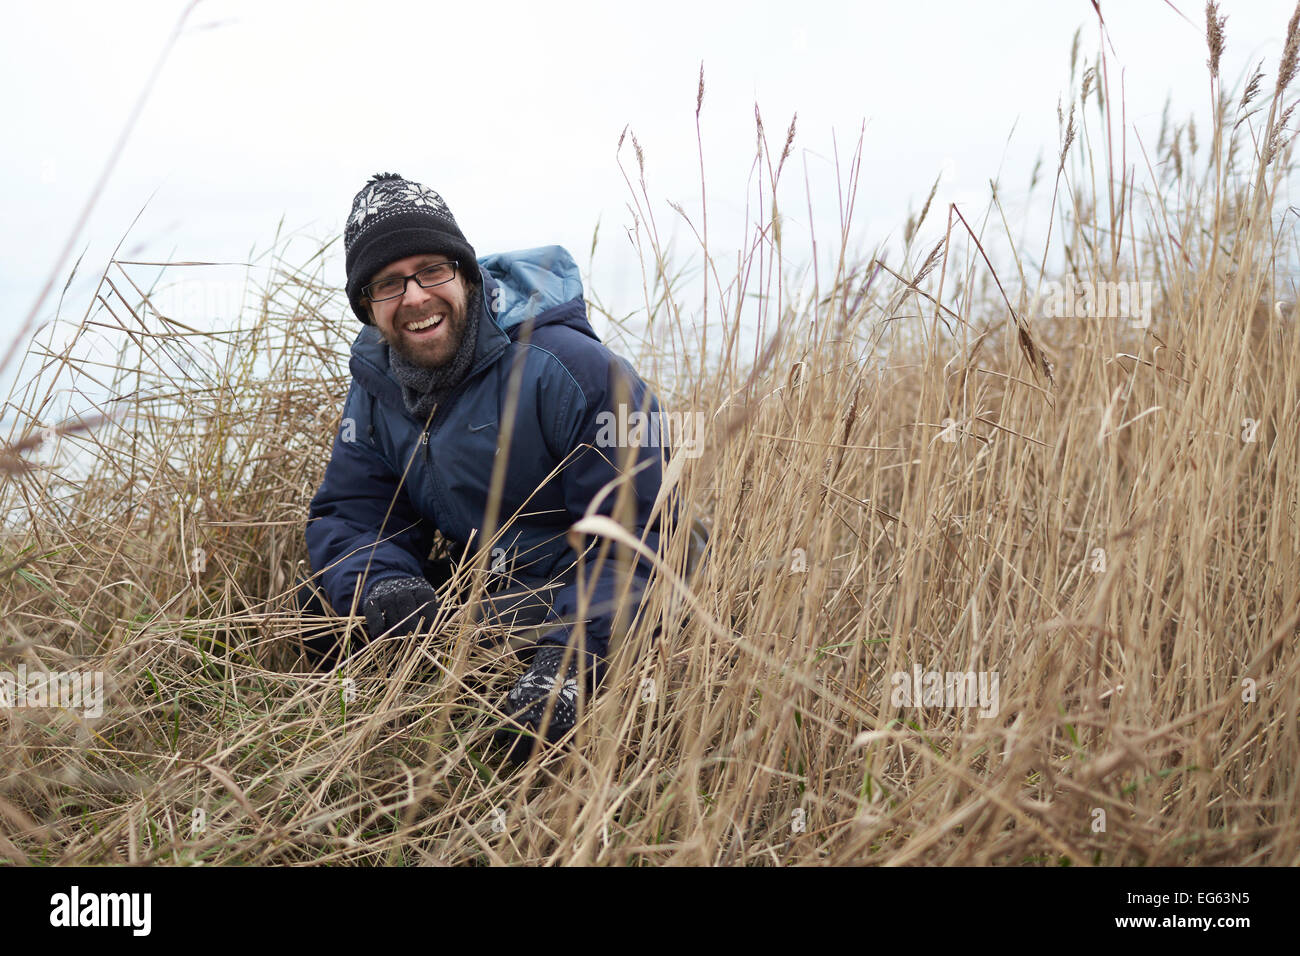 A portrait of a man laughing as he squats in long grasses Stock Photo